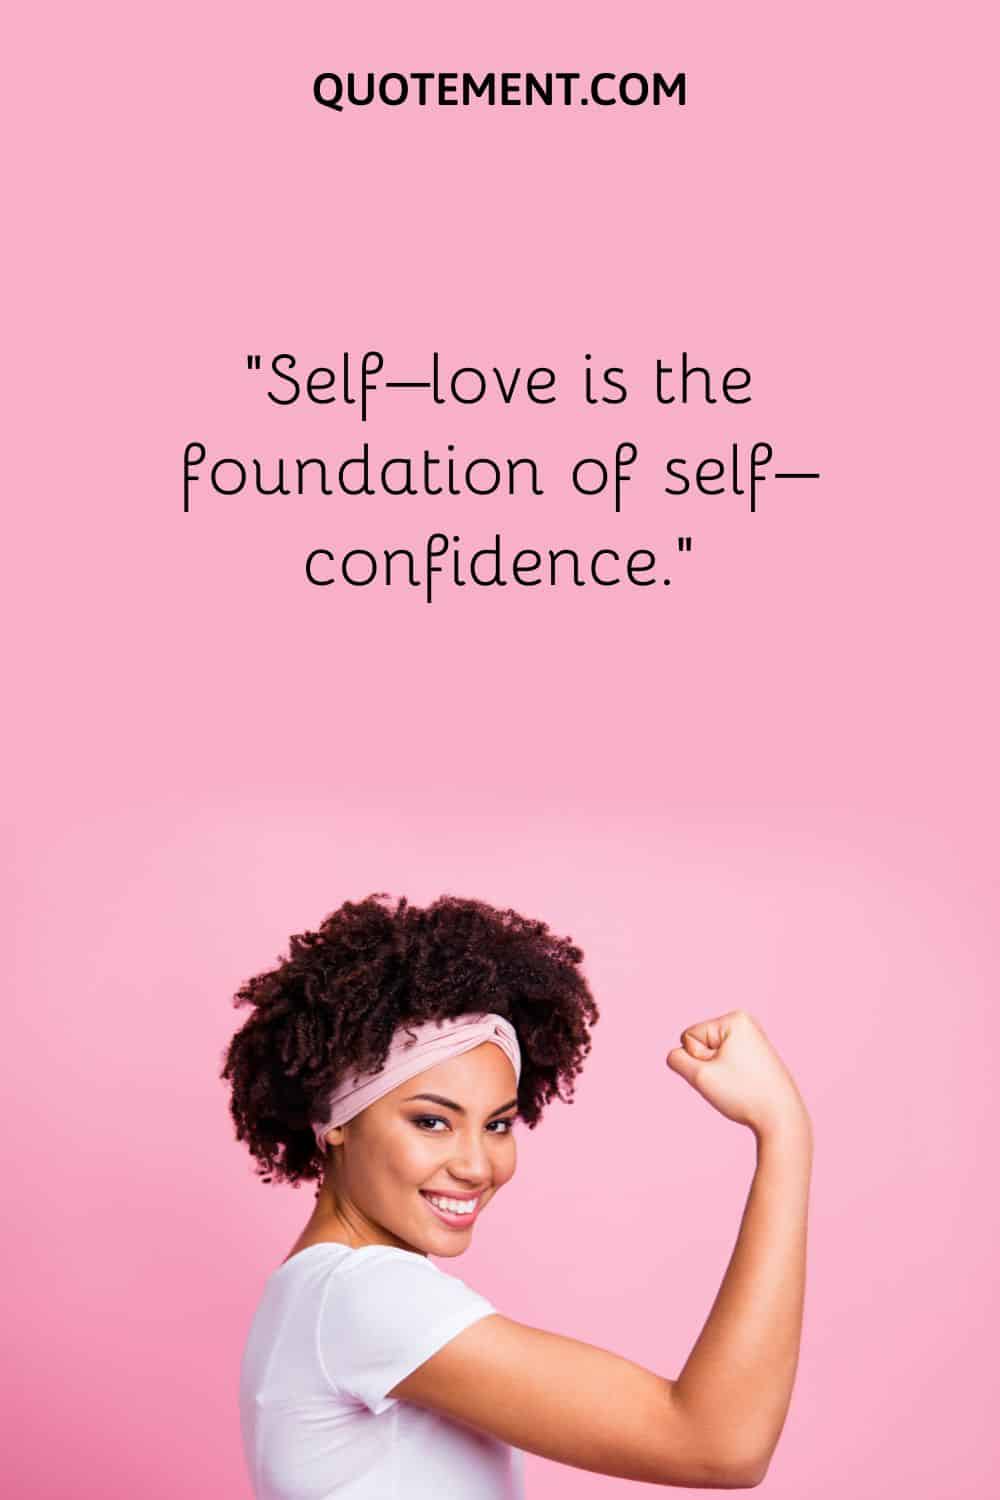 Self–love is the foundation of self–confidence